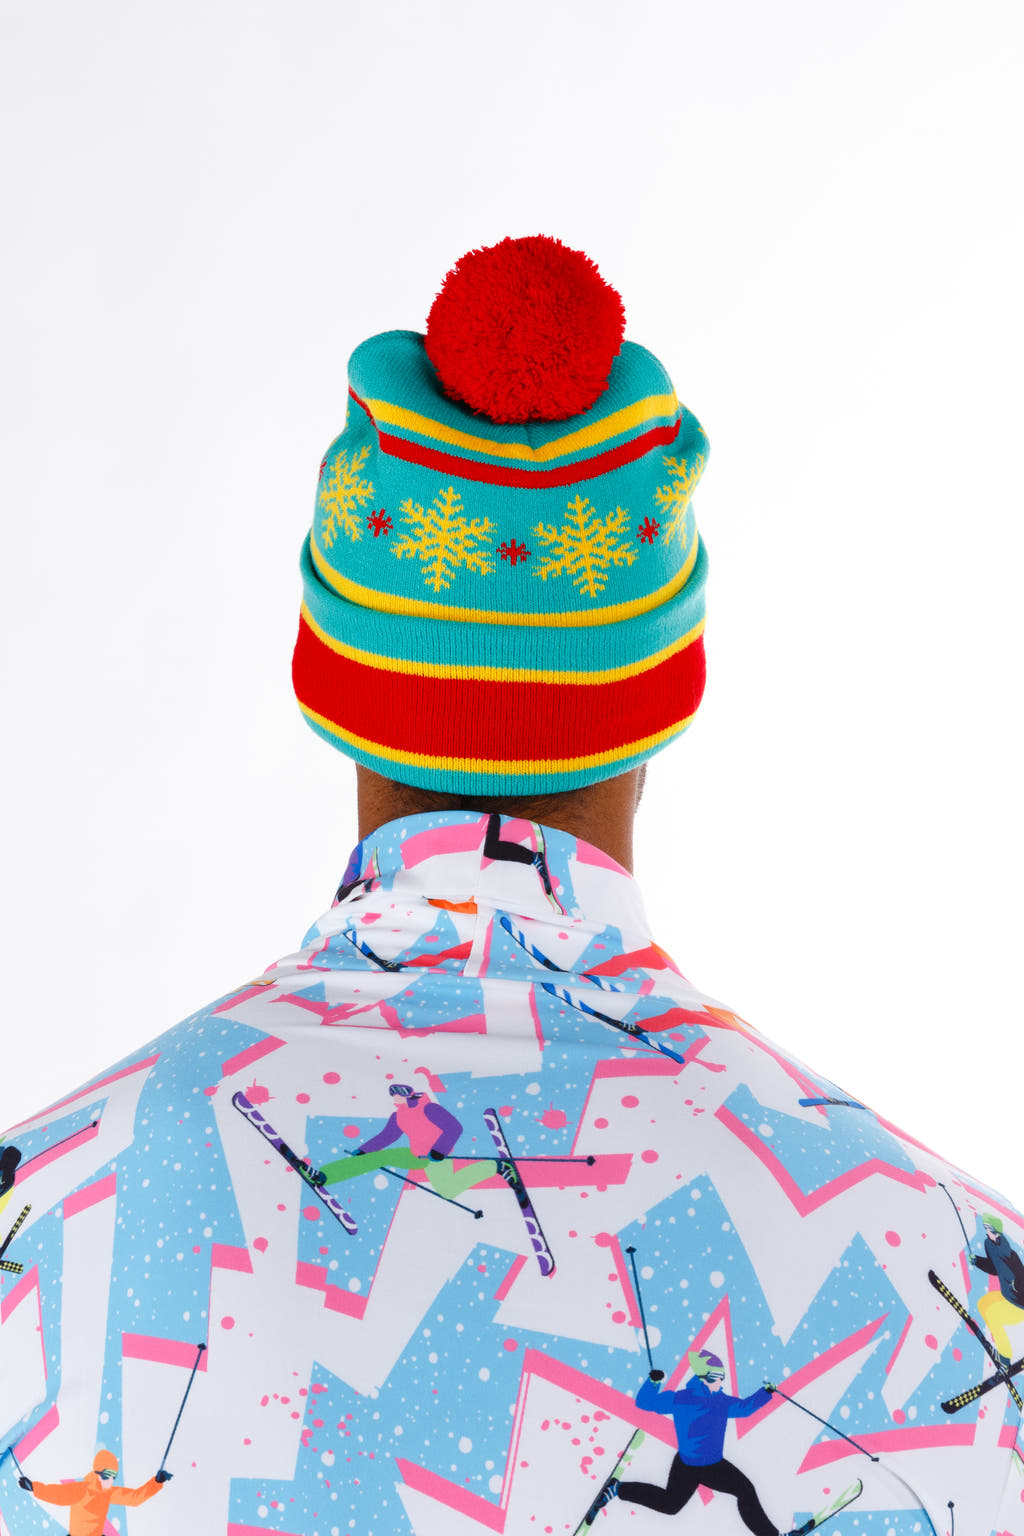 Vintage and retro colorful winter beanie